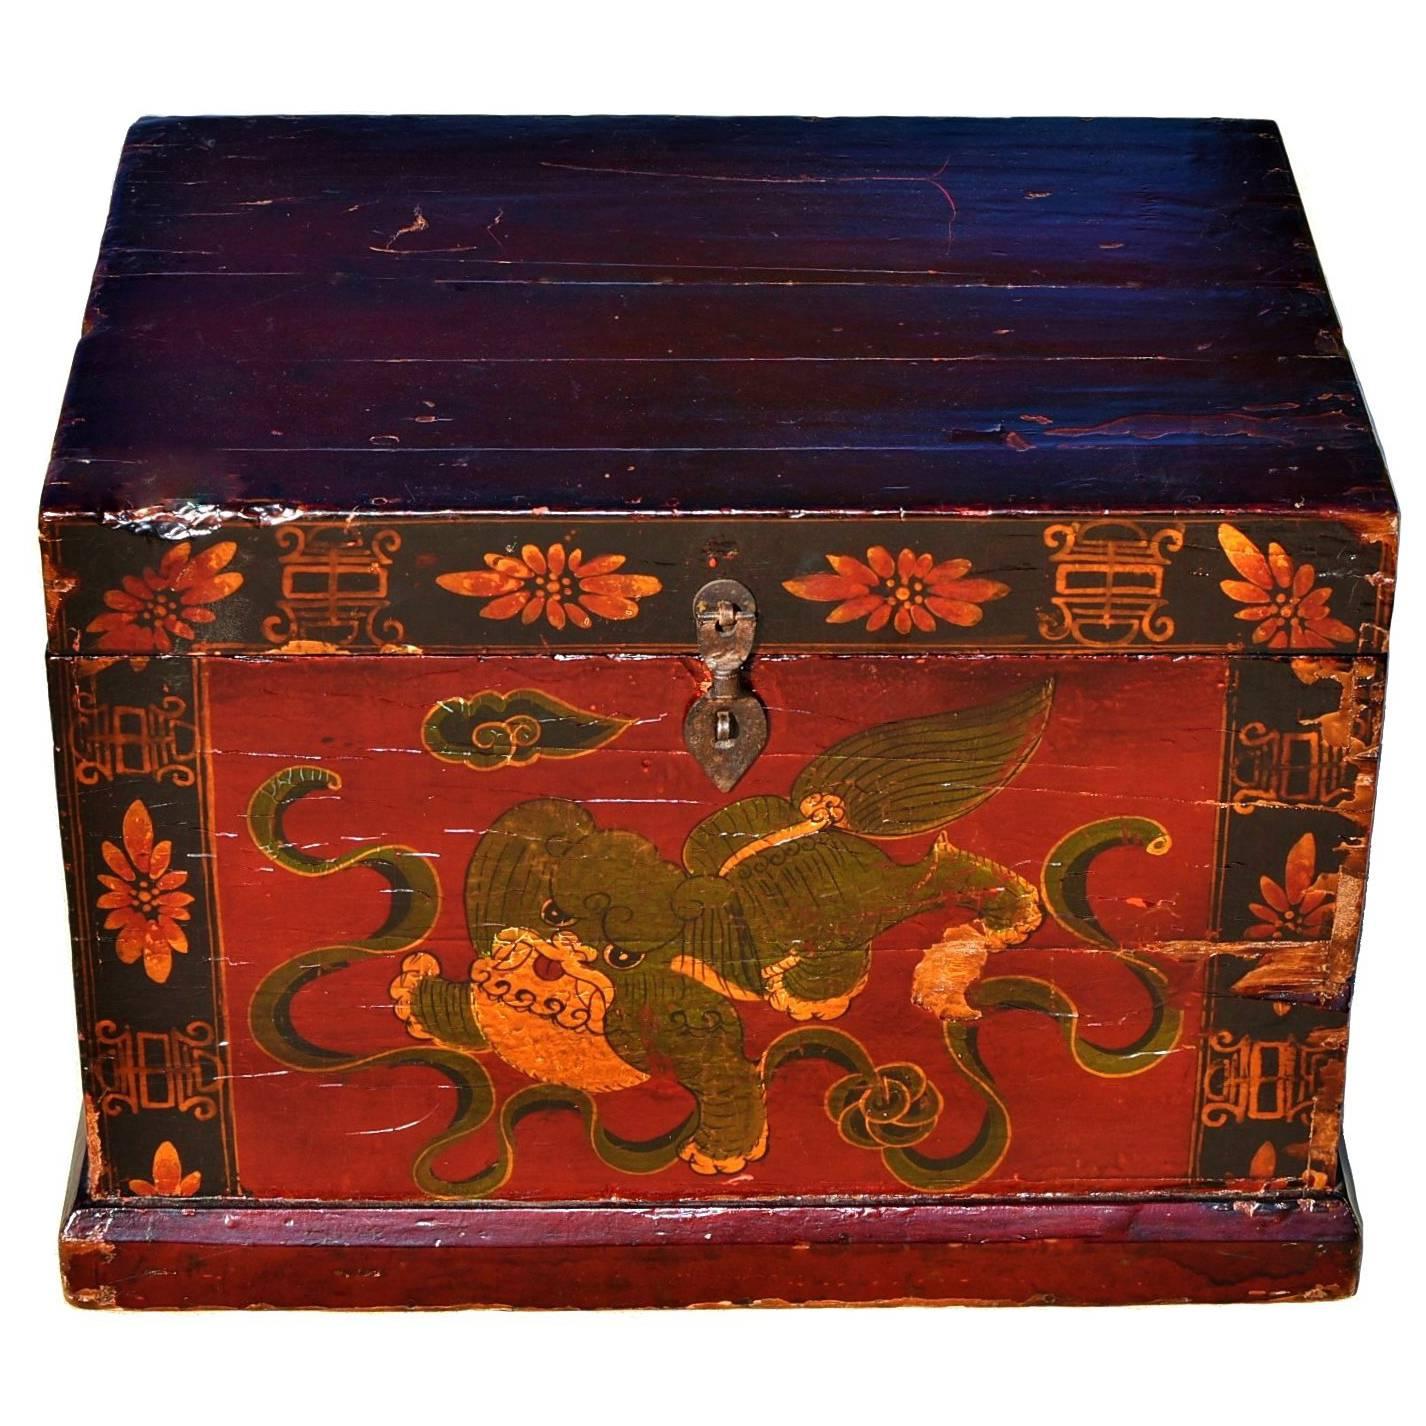 Large Painted Box with Foo Dog, Antique Trunk